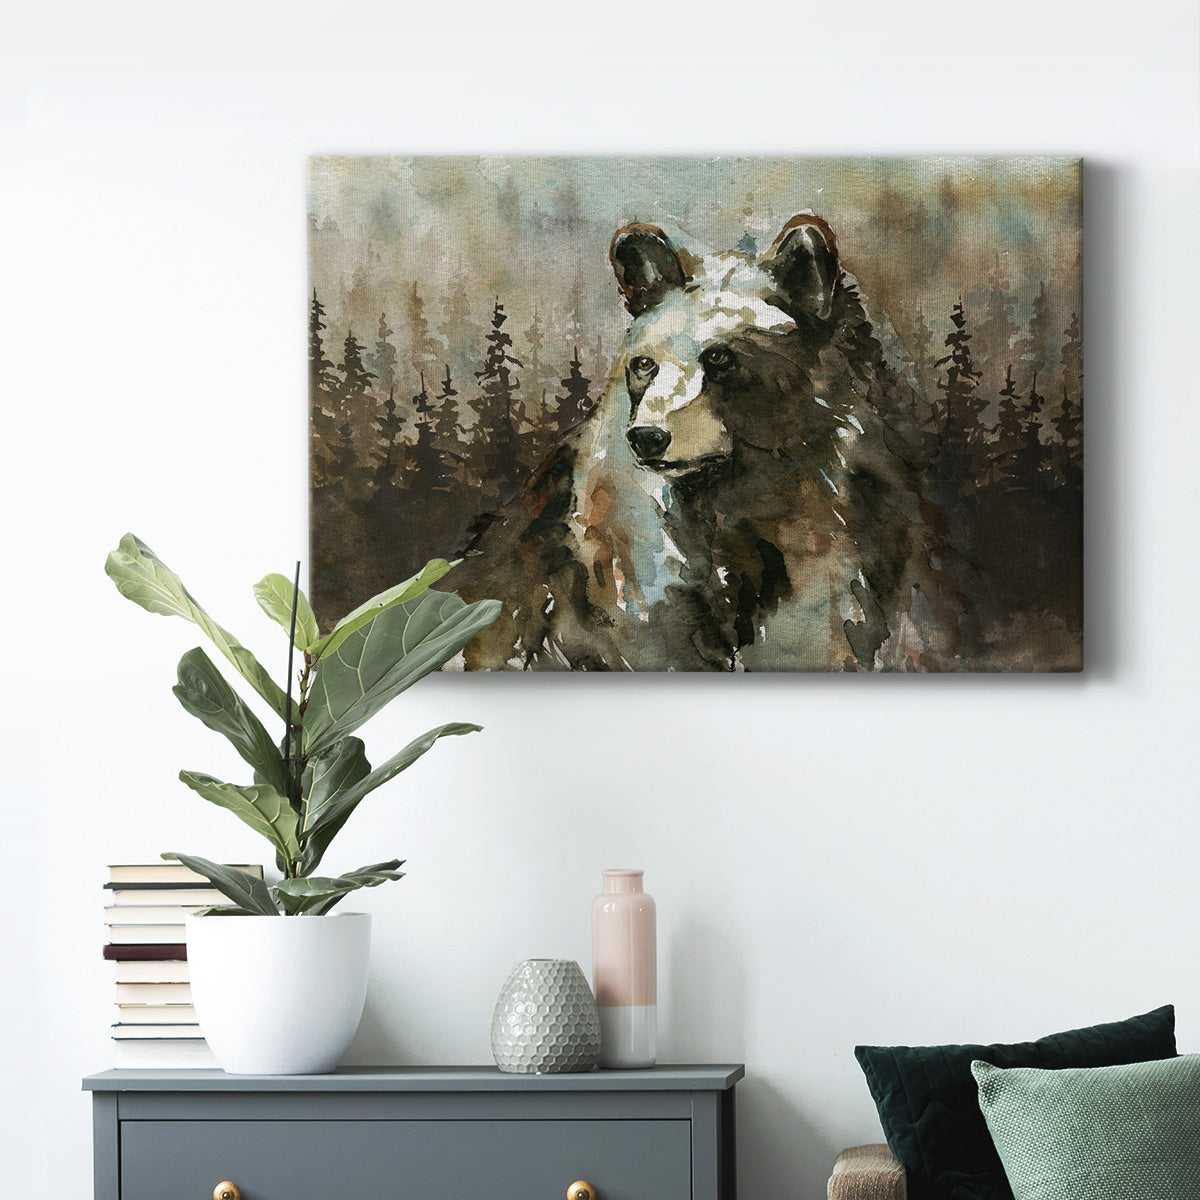 Lodge Twilight II Premium Gallery Wrapped Canvas - Ready to Hang